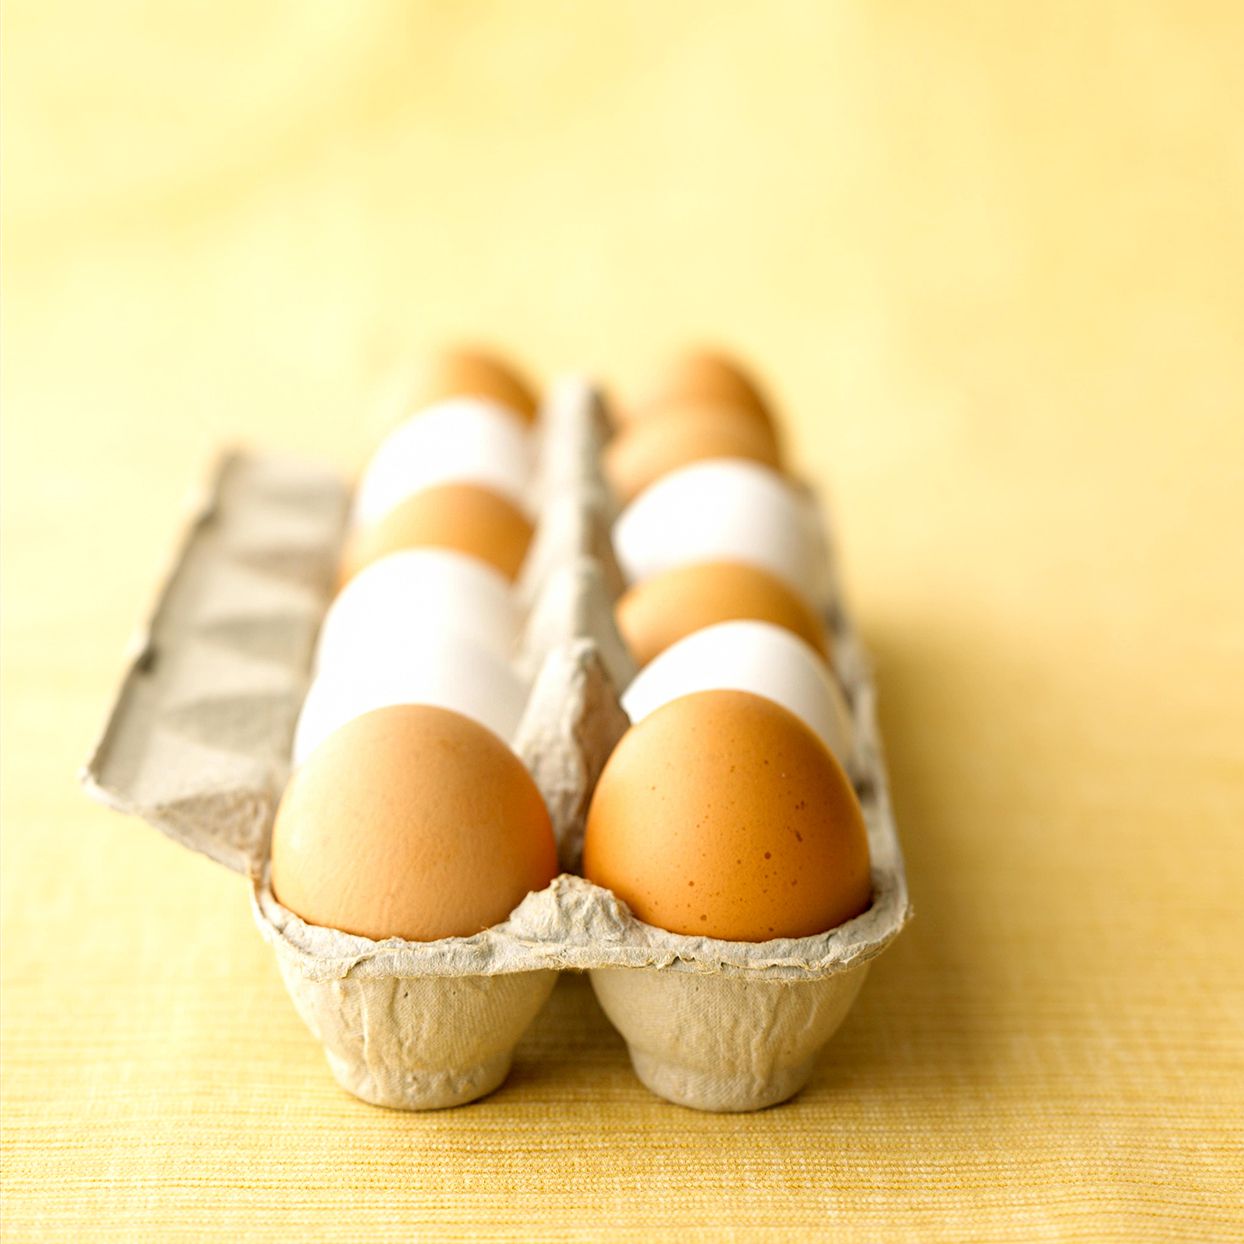 Brown and white eggs in carton on yellow cloth